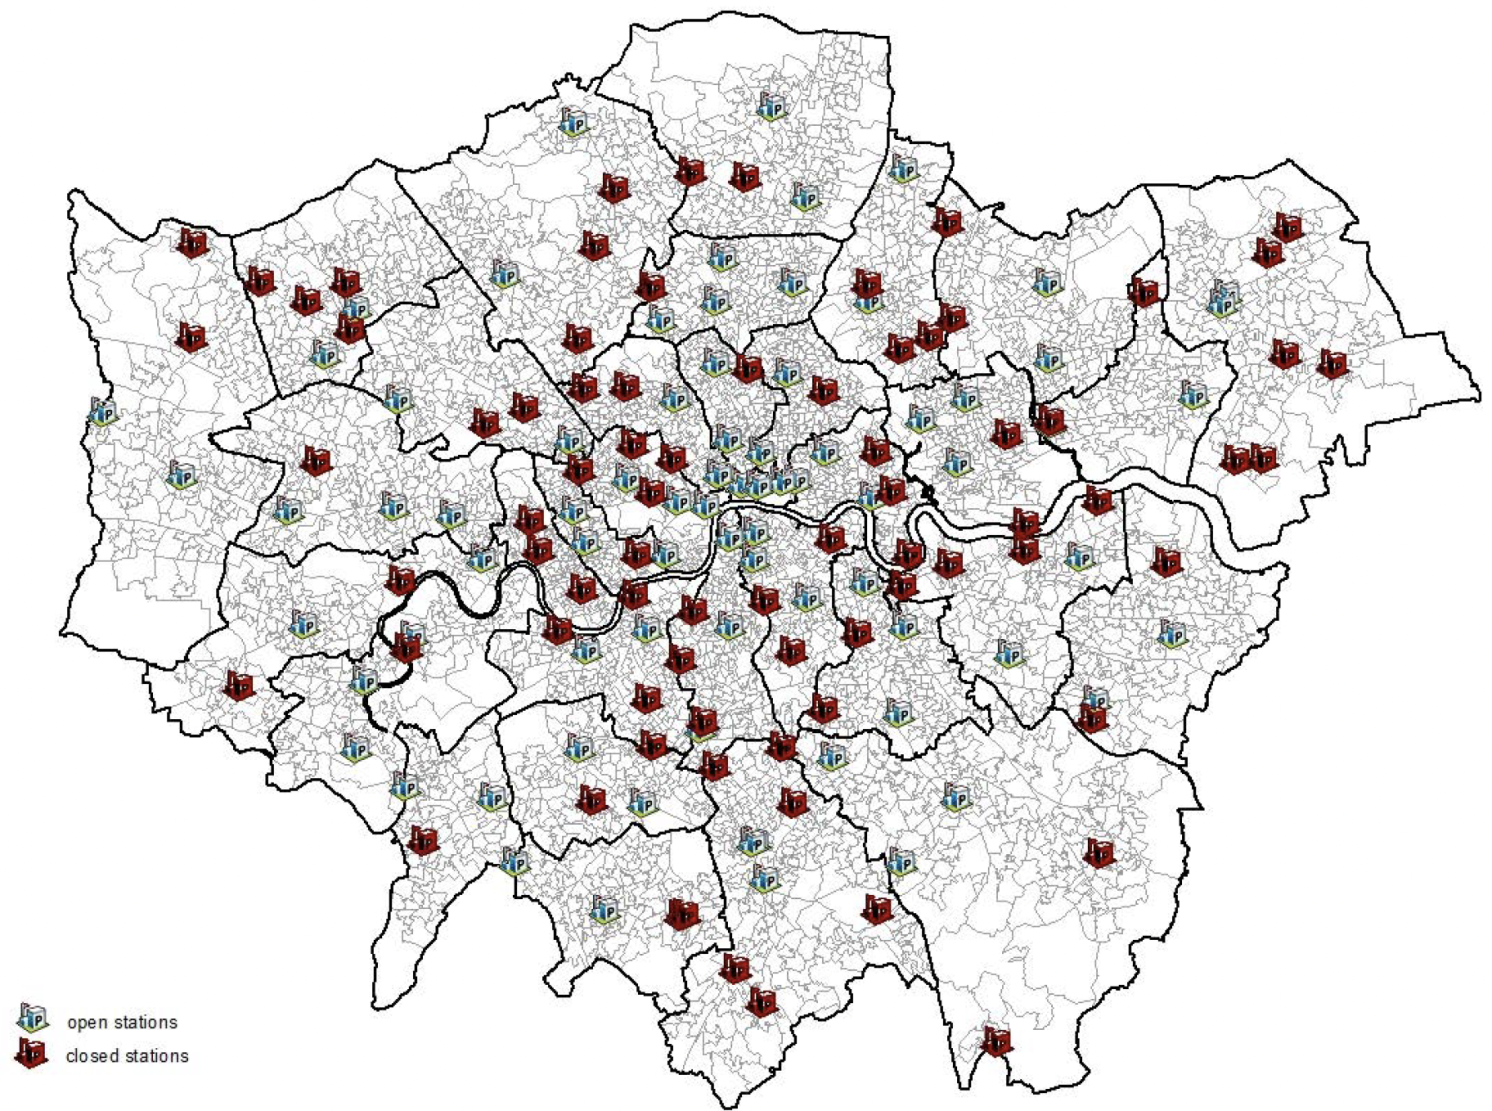 Figure 2 Distribution of open and closed police stations in Greater London